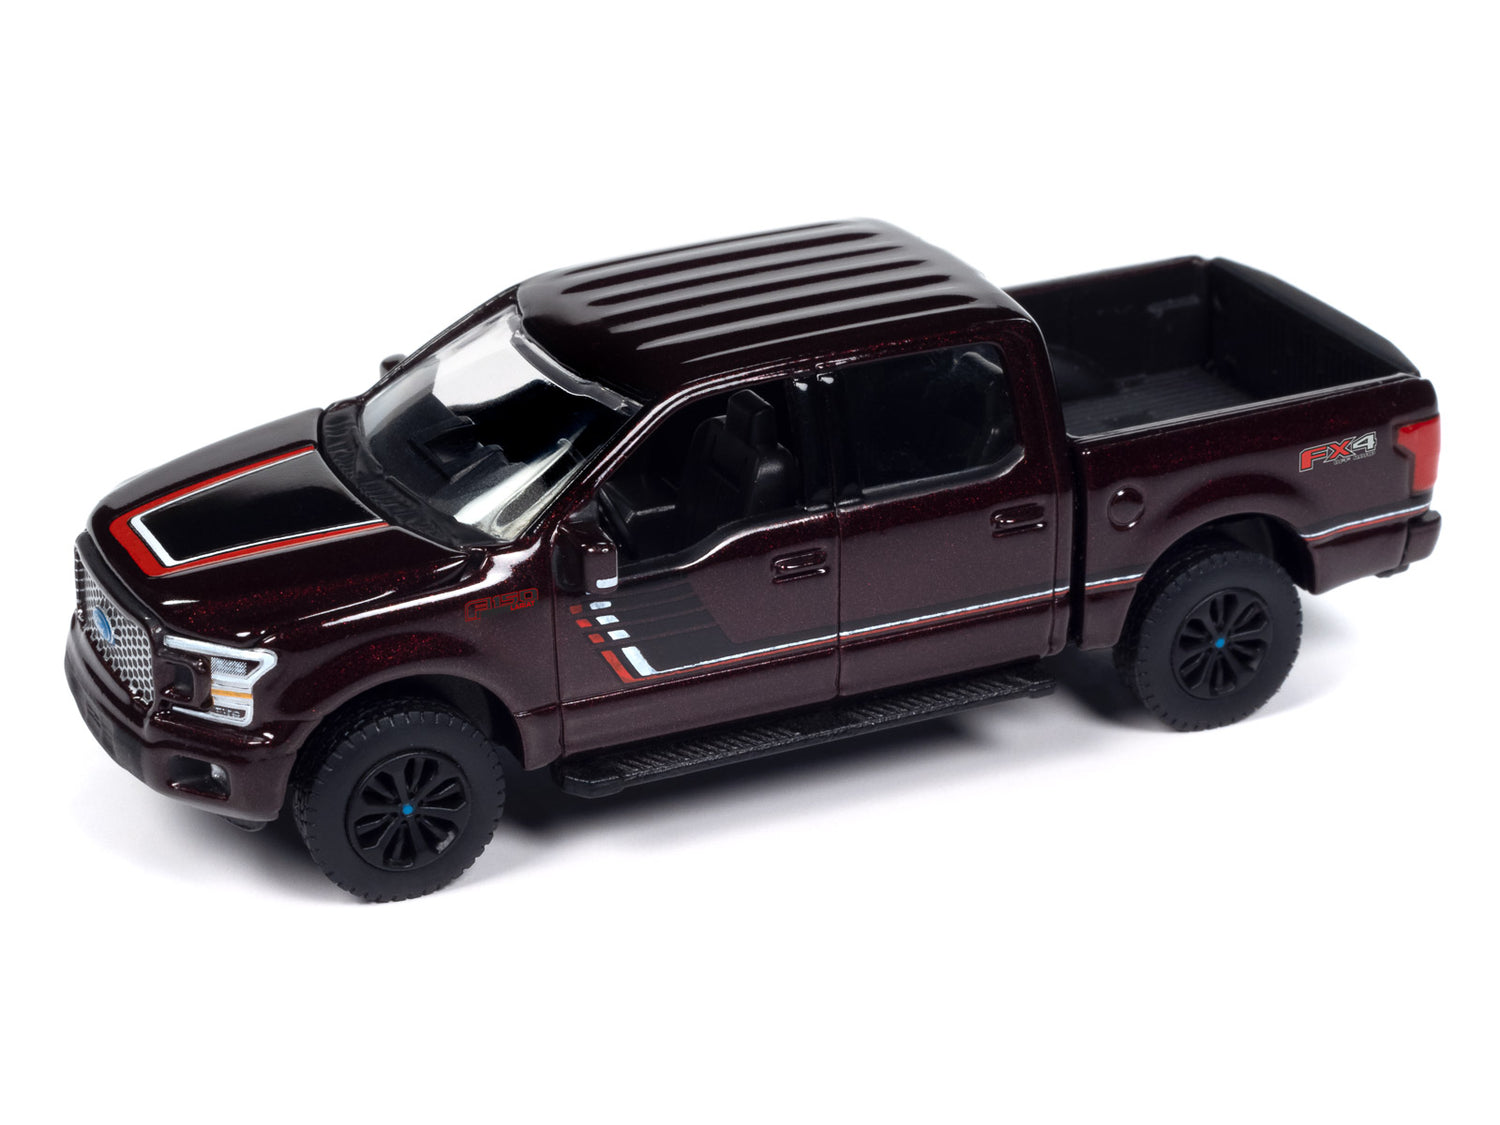 Auto World 2020 Ford F-150 Truck (New Front Core & Wheels) (Magma Red Metallic w/Hood & Side Stripes) 1:64 Diecast